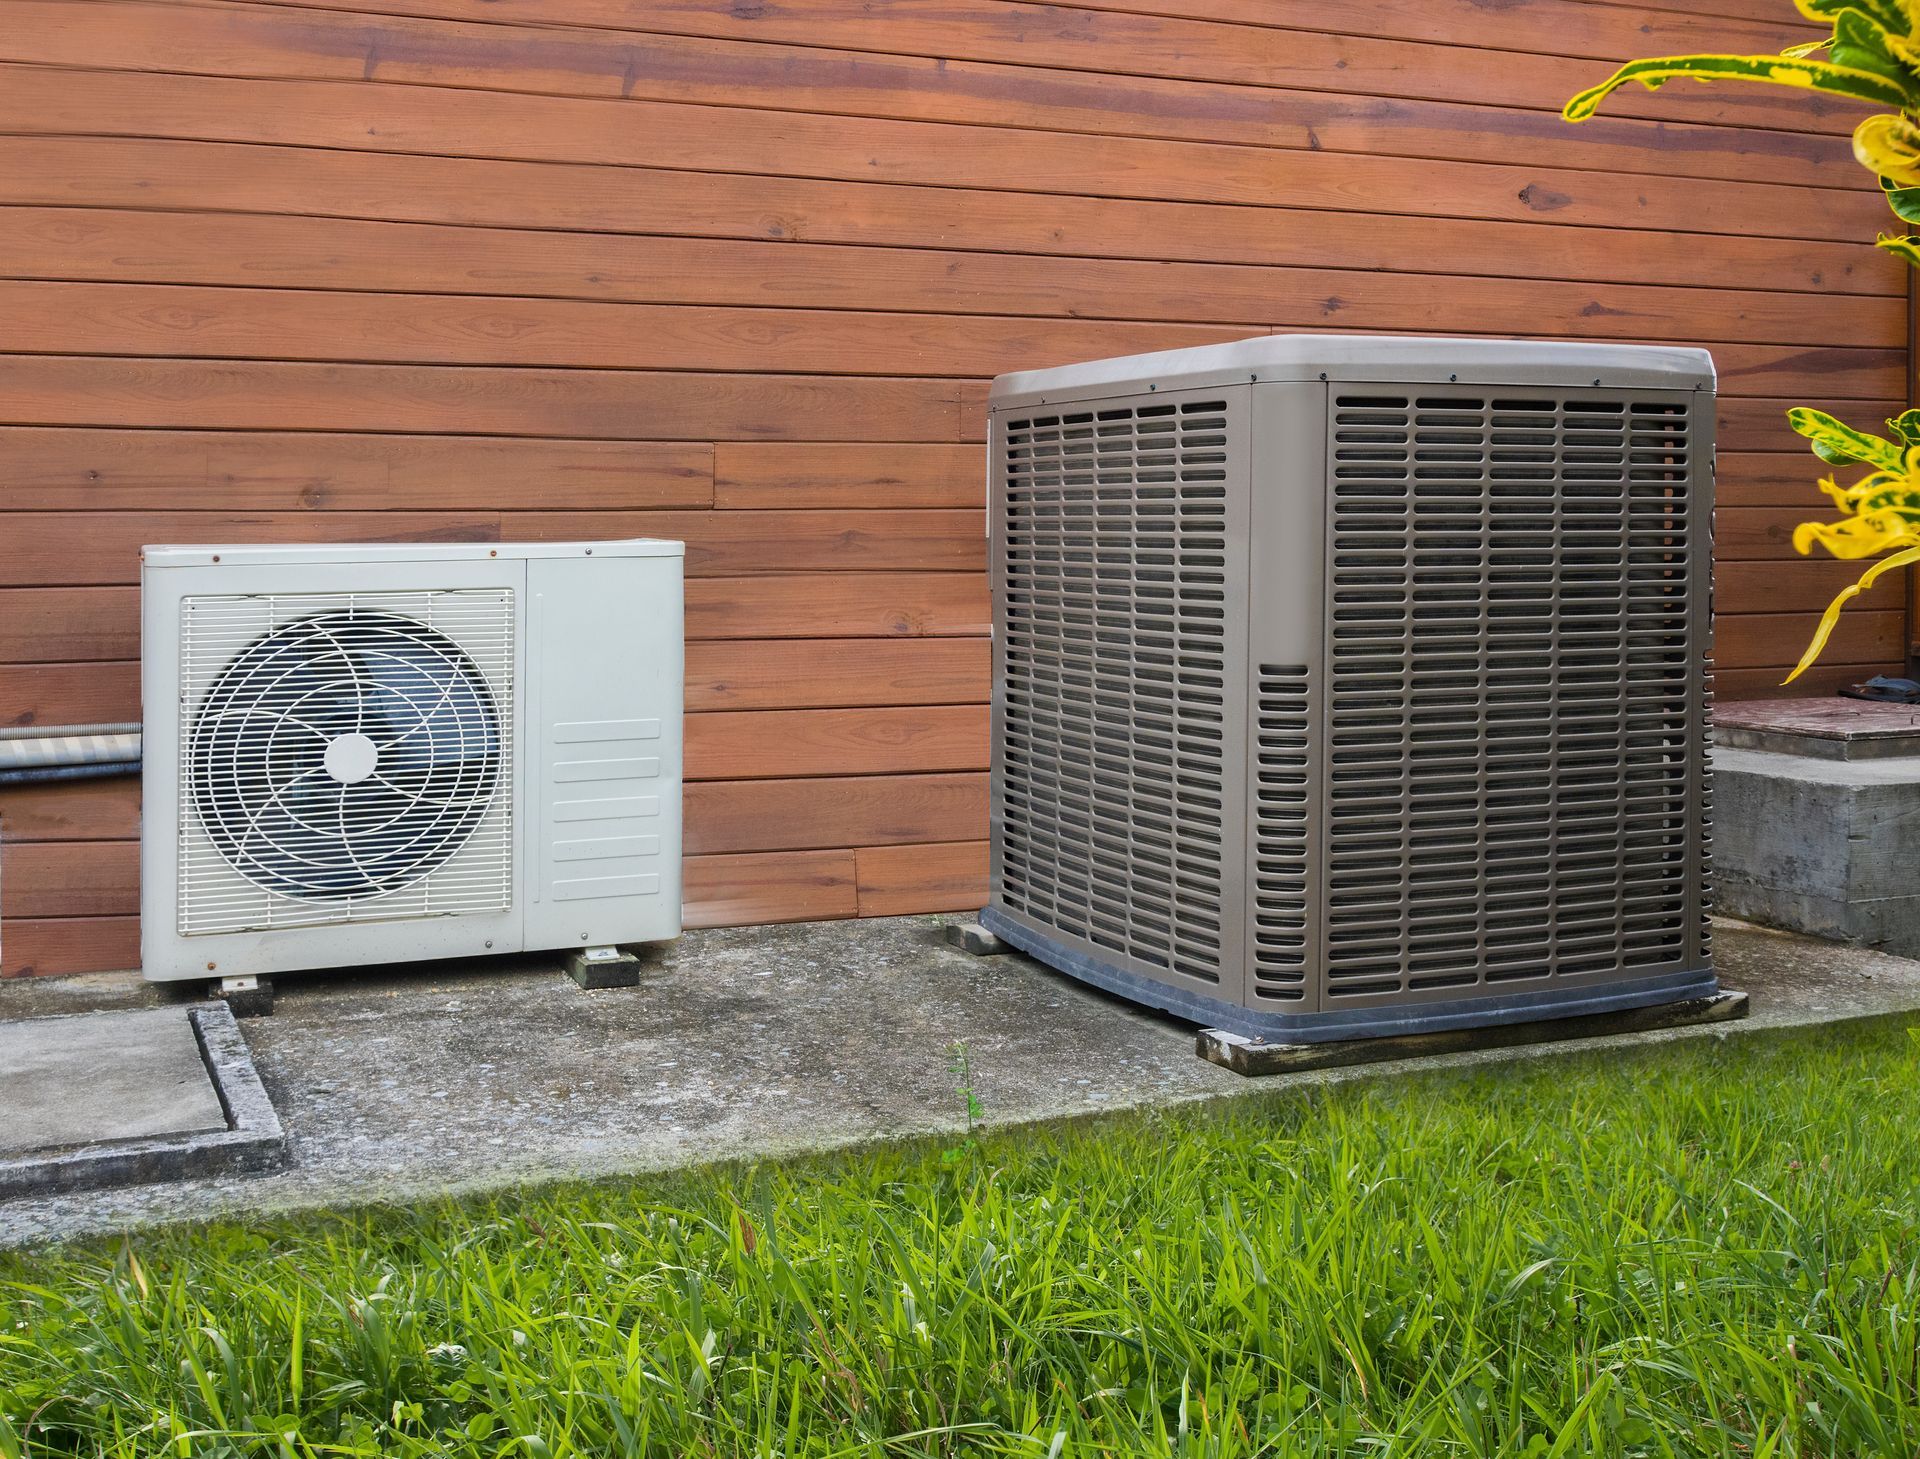 can a heat pump replace a furnace and ac?